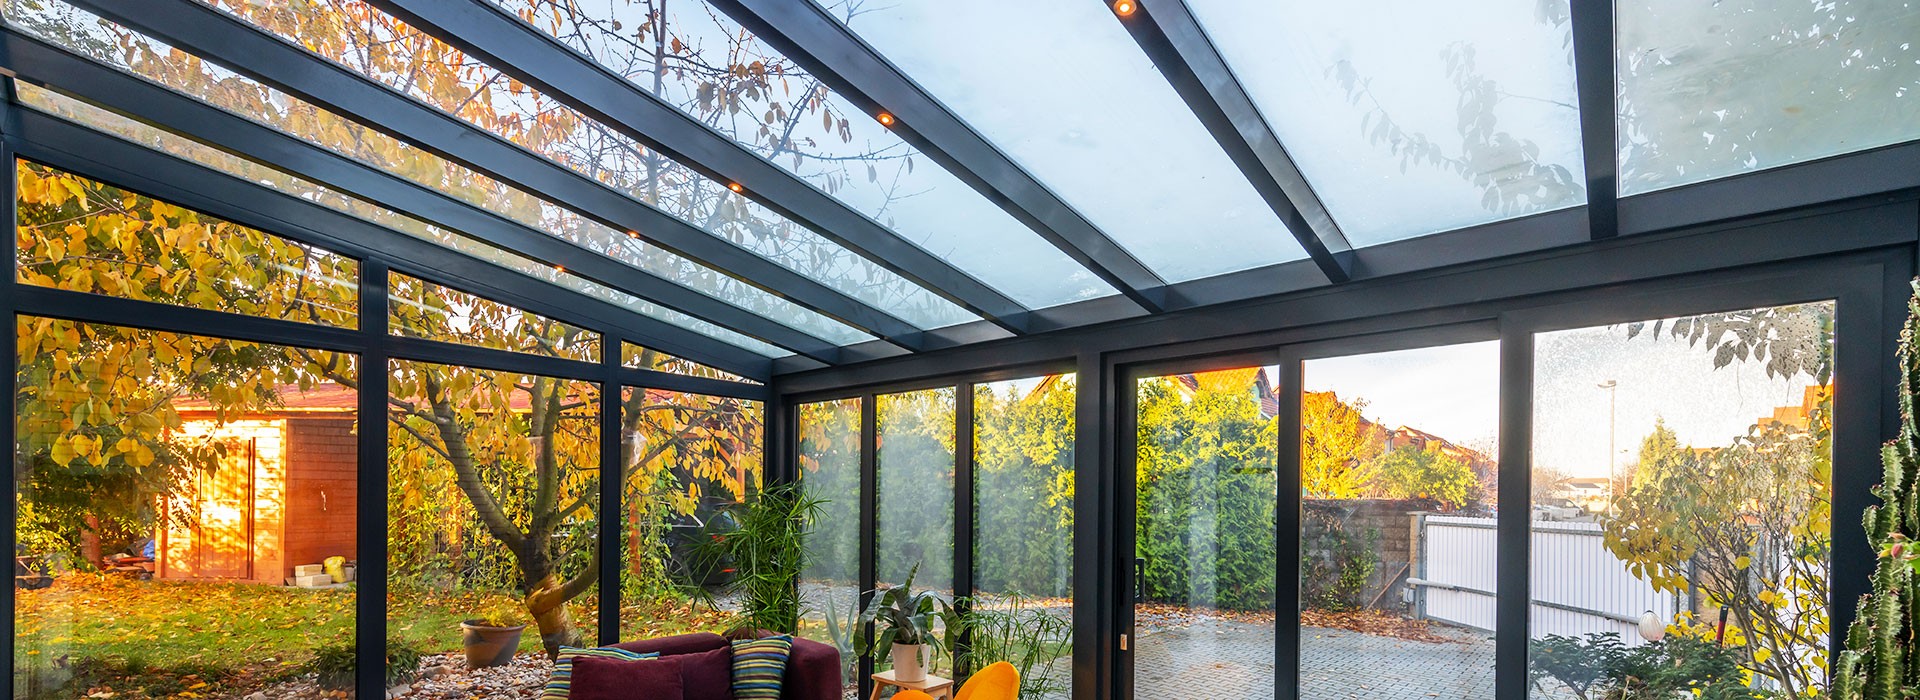 Aluminium conservatories with glass or polycarbonate